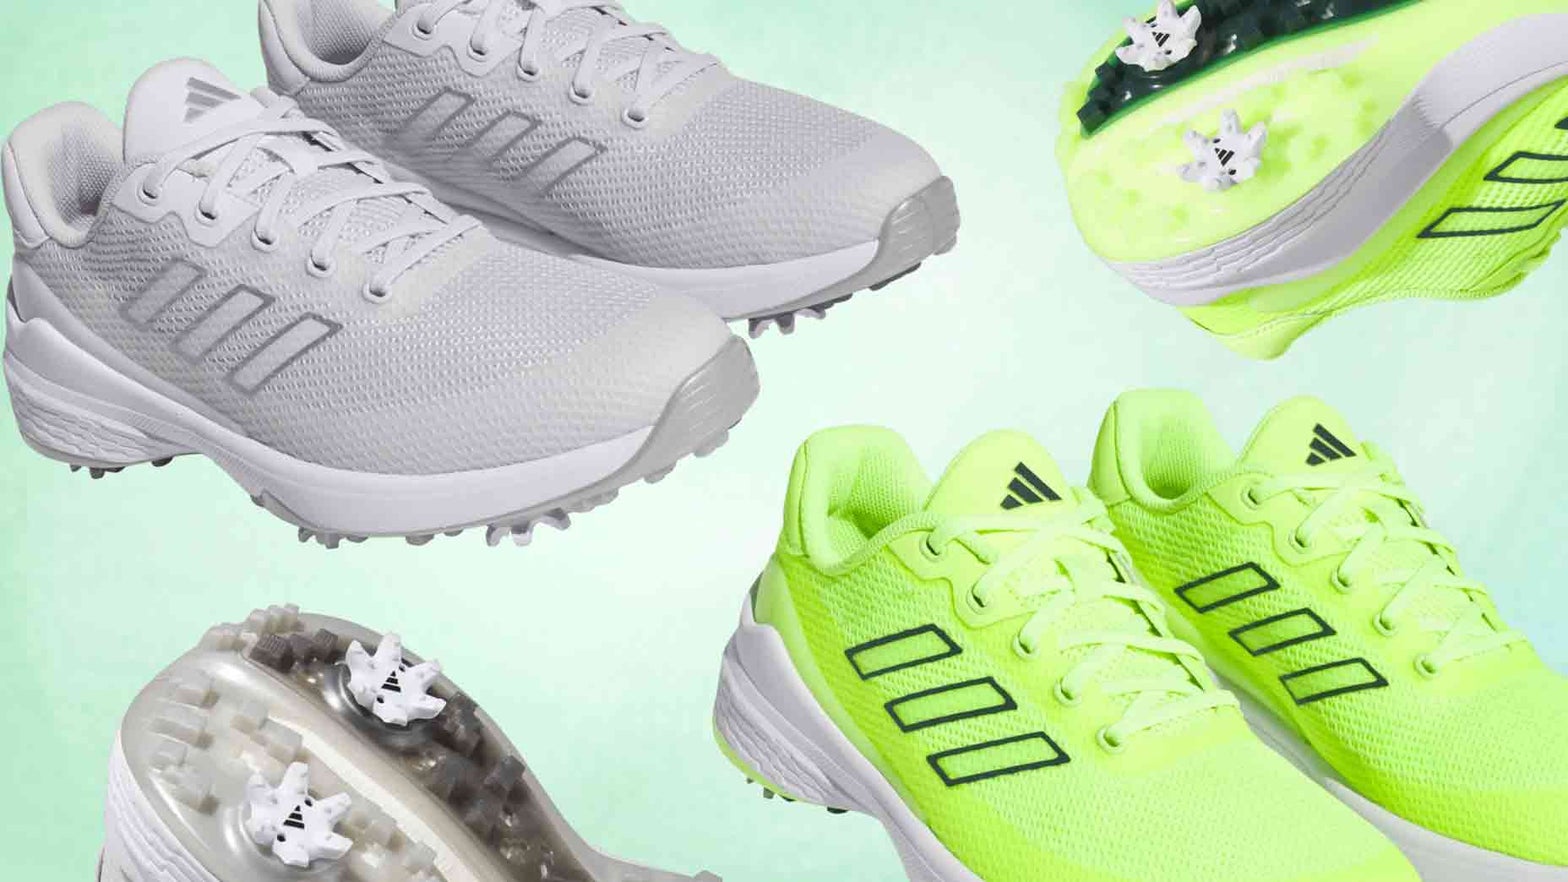 These new Adidas golf shoes are built to defeat the heat